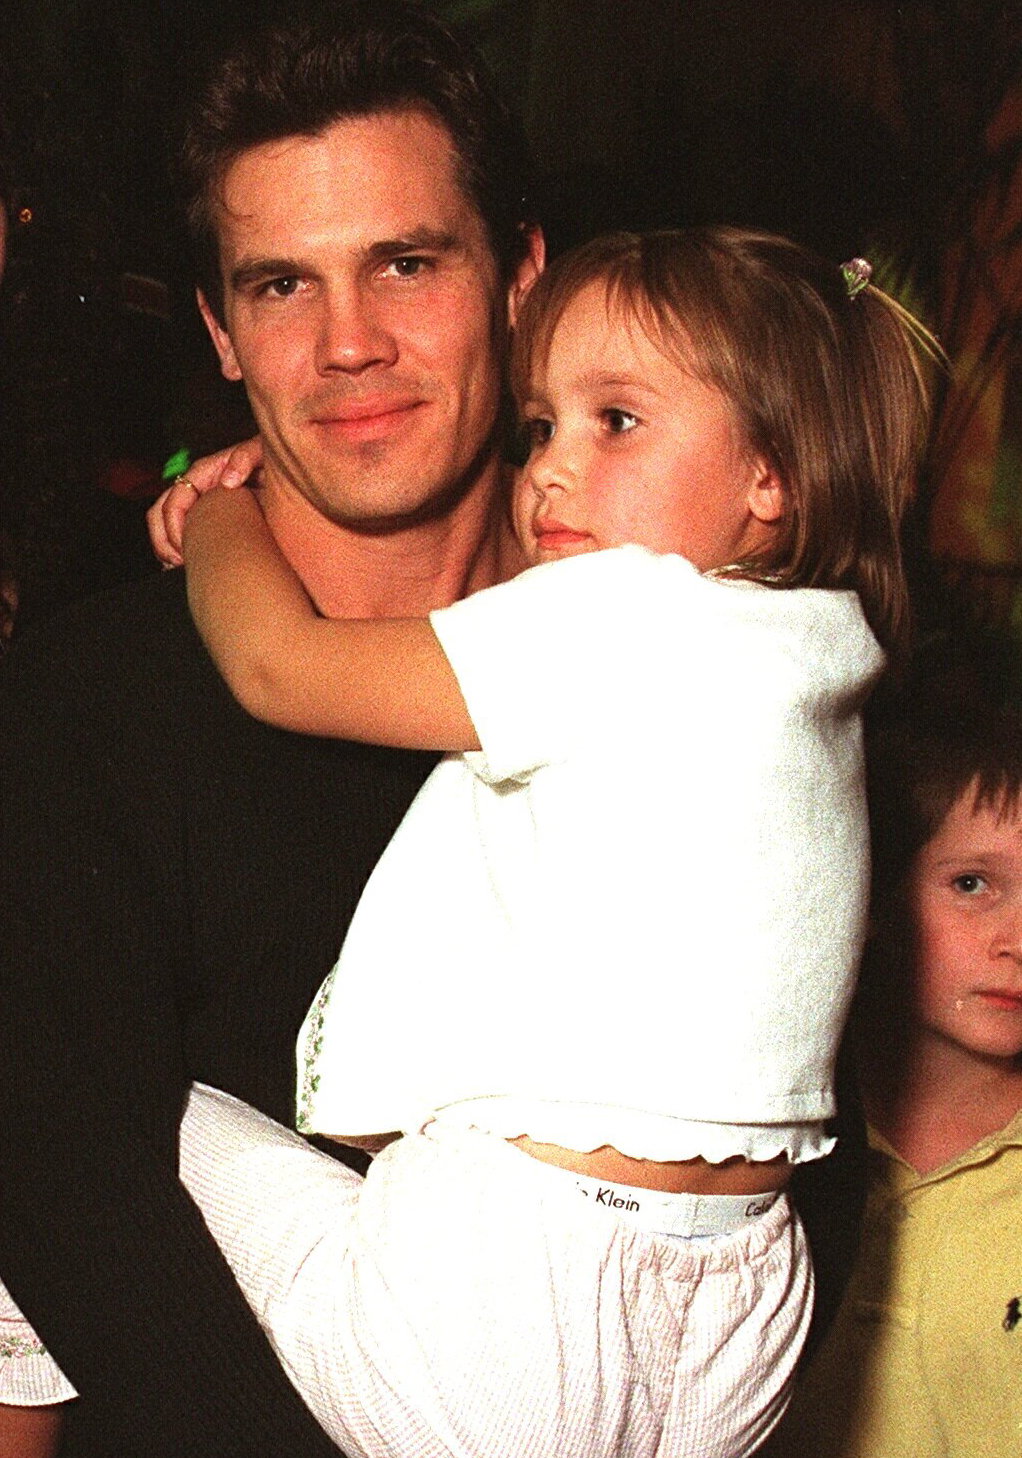 <p>Josh Brolin brought daughter Eden Brolin -- one of his two kids with his first wife, actress Alice Adair -- to the "Shanghai Noon" premiere in Los Angeles on May 24, 2000, when Eden was 7. Keep reading to see Eden, who's followed in her parents' footsteps, all grown up...</p>